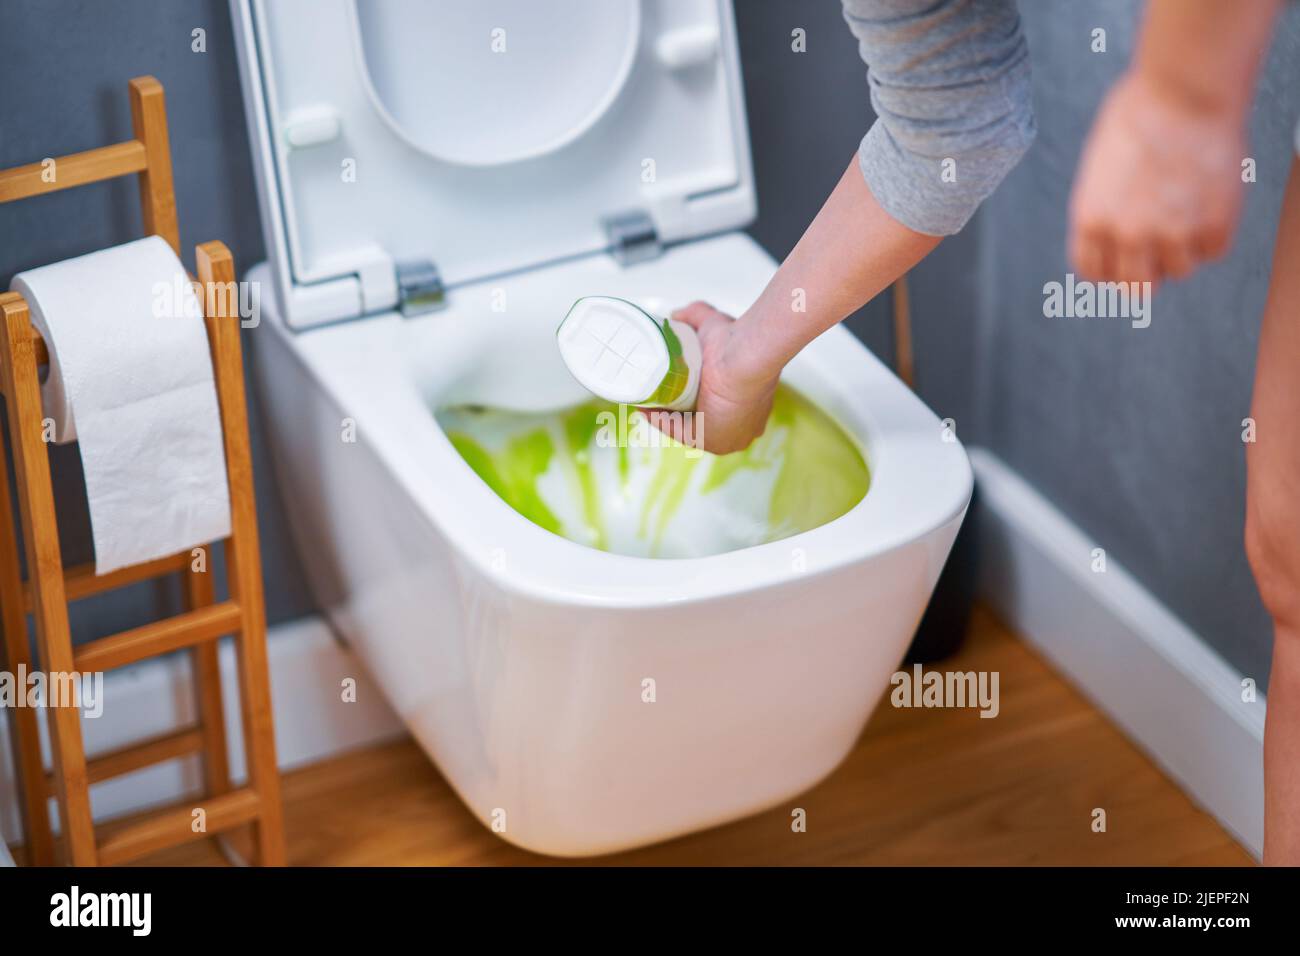 Picture of cleaning toilet seat with chemicals Stock Photo